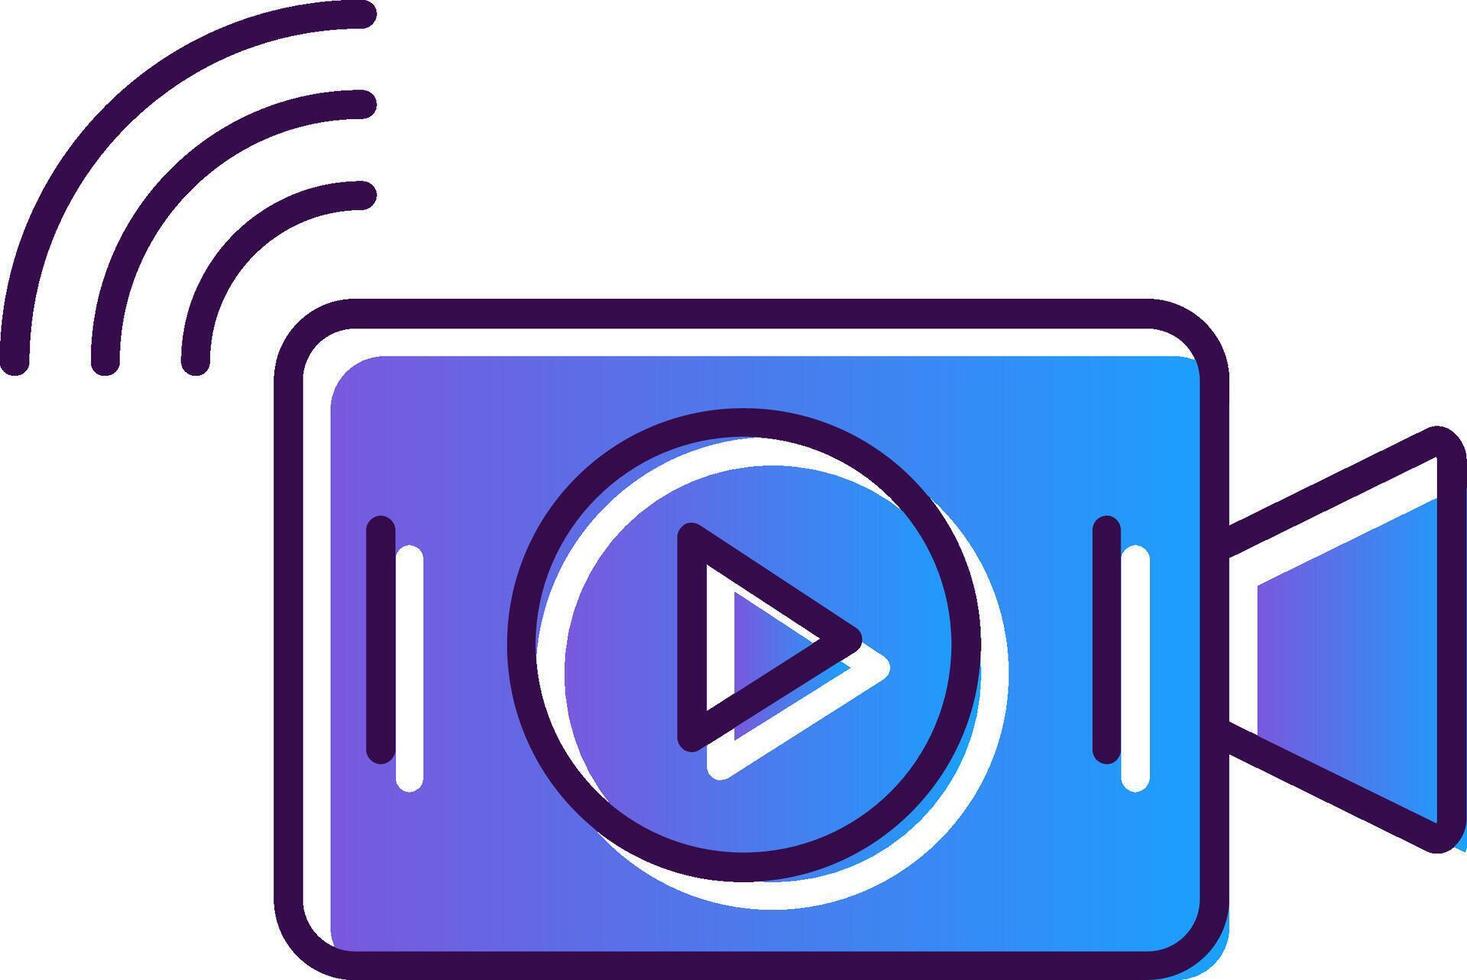 Live Stream Gradient Filled Icon vector